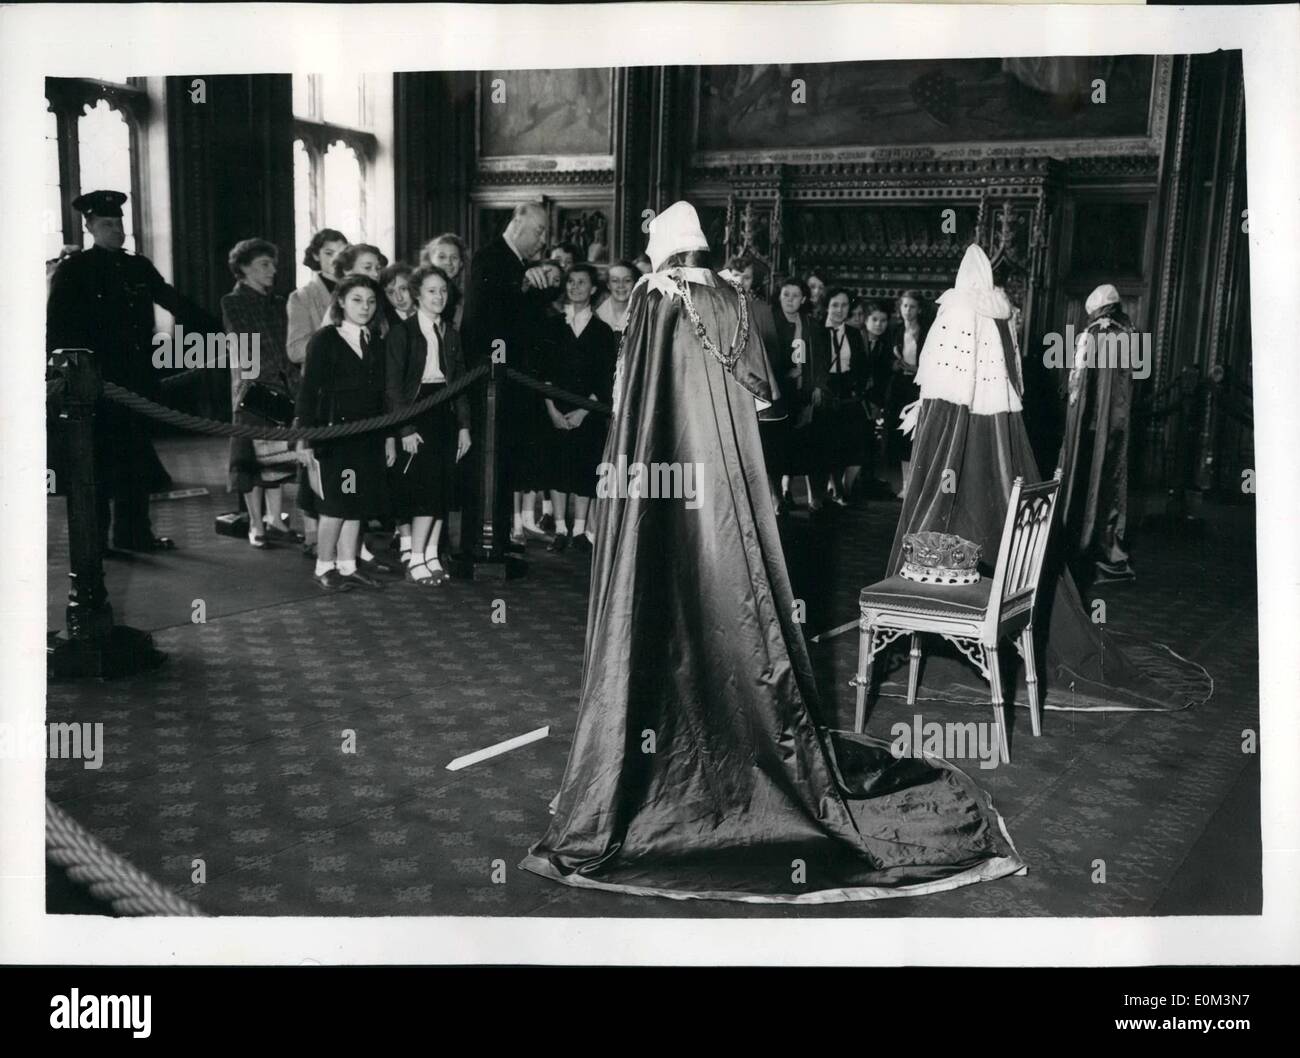 May 05, 1953 - Children at Robes and Insignia exhibition: Schoolchildren from the Hyde Park Girls' school at Doncaster, Yorkshire, who are in London on a week's holiday, are shown over the Exhibition of robes and Insignia in the Royal Robing Room, House of Lords, by Mr. Joseph Mayes, a member of the staff of the Palace of Westminster. The robes, from left to right are: The Royal Victorian Order (blue with red edgings and gold tassels), which Goronet; and the order of St. Michael and St. George (Royal blue). The exhibition is open to the public. Stock Photo